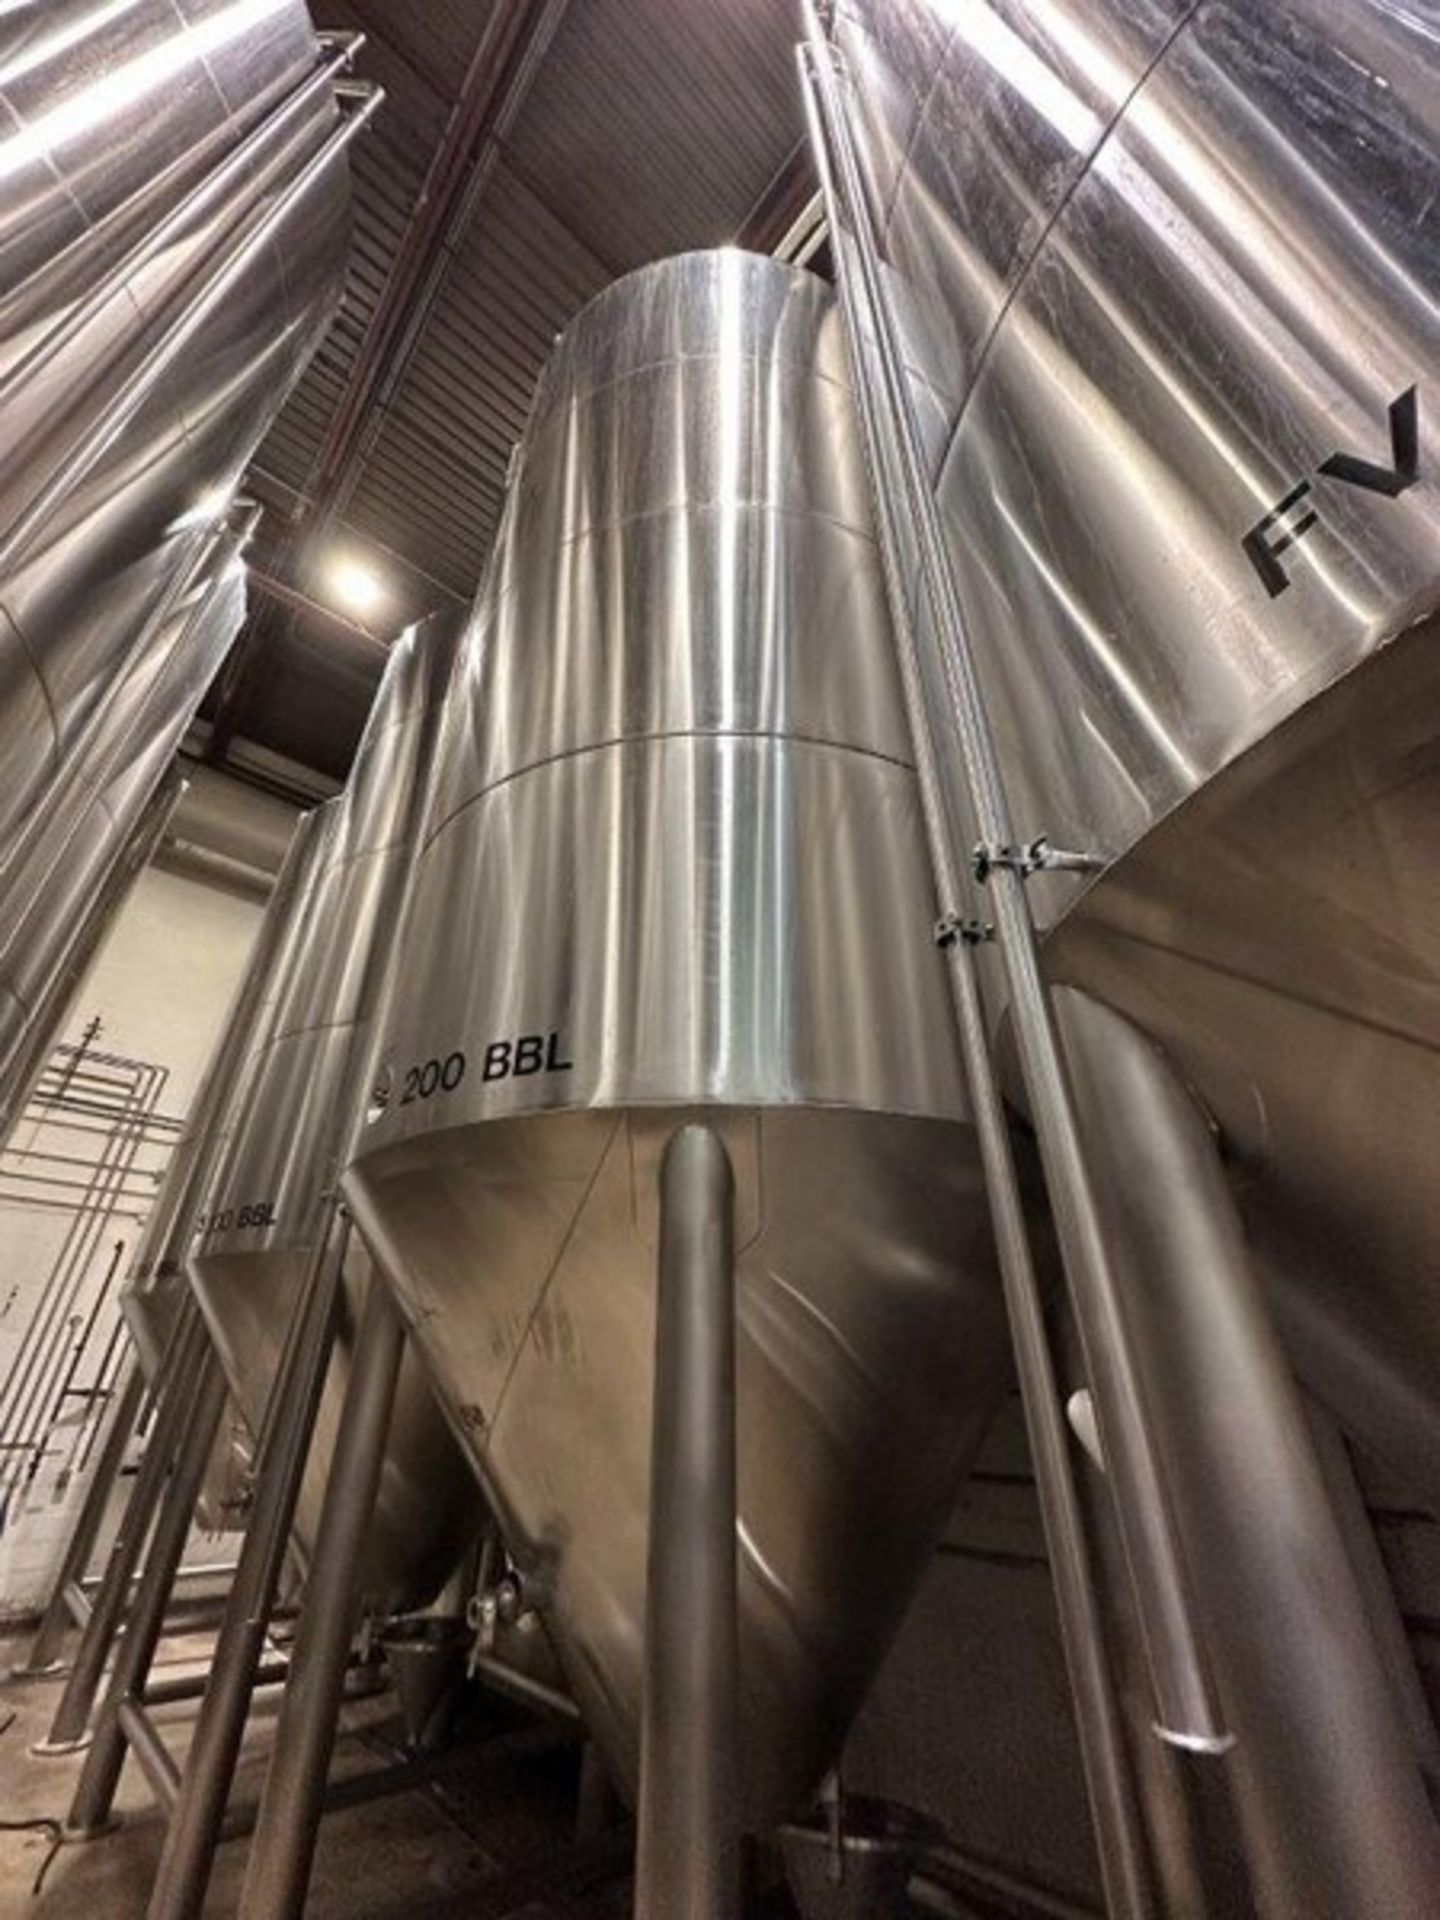 200 BBL Vertical Cone Bottom 304 Stainless Steel Jacketed Vessel. Manufactured by JV Northwest (ICC) - Image 2 of 5